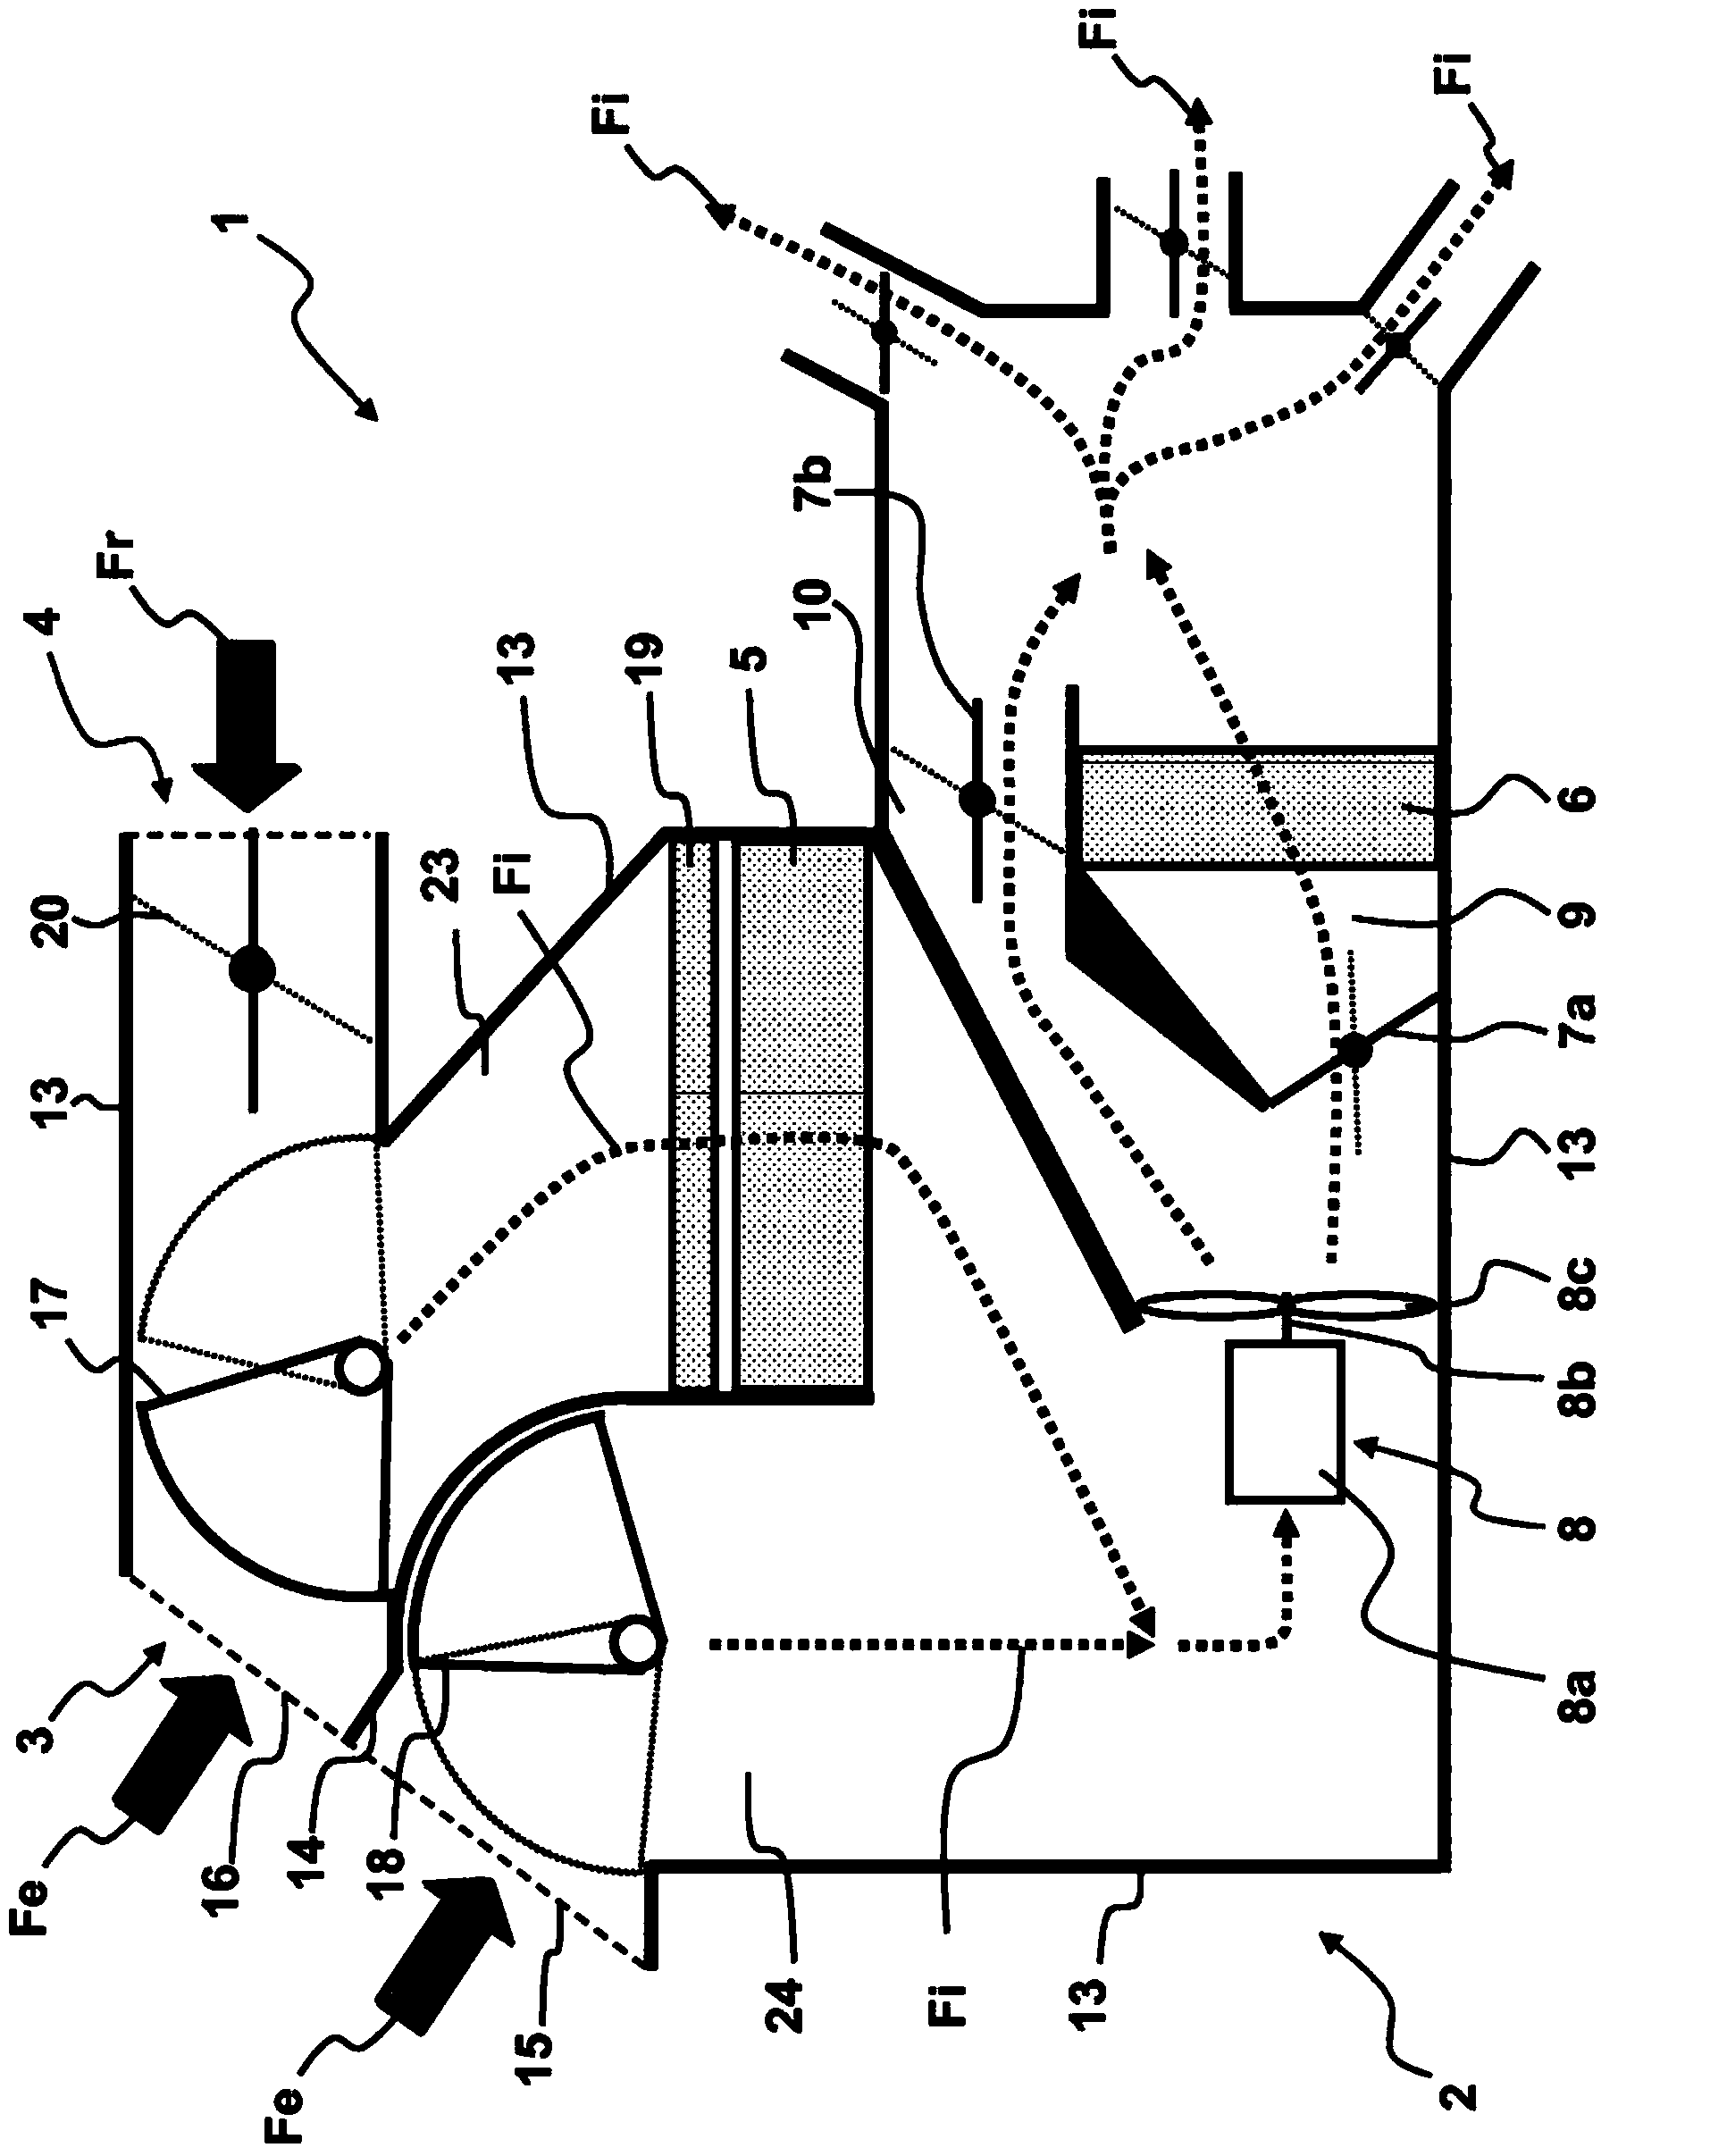 Heating, ventilation and/or air-conditioning apparatus including an air flow channel bypassing a heat exchanger